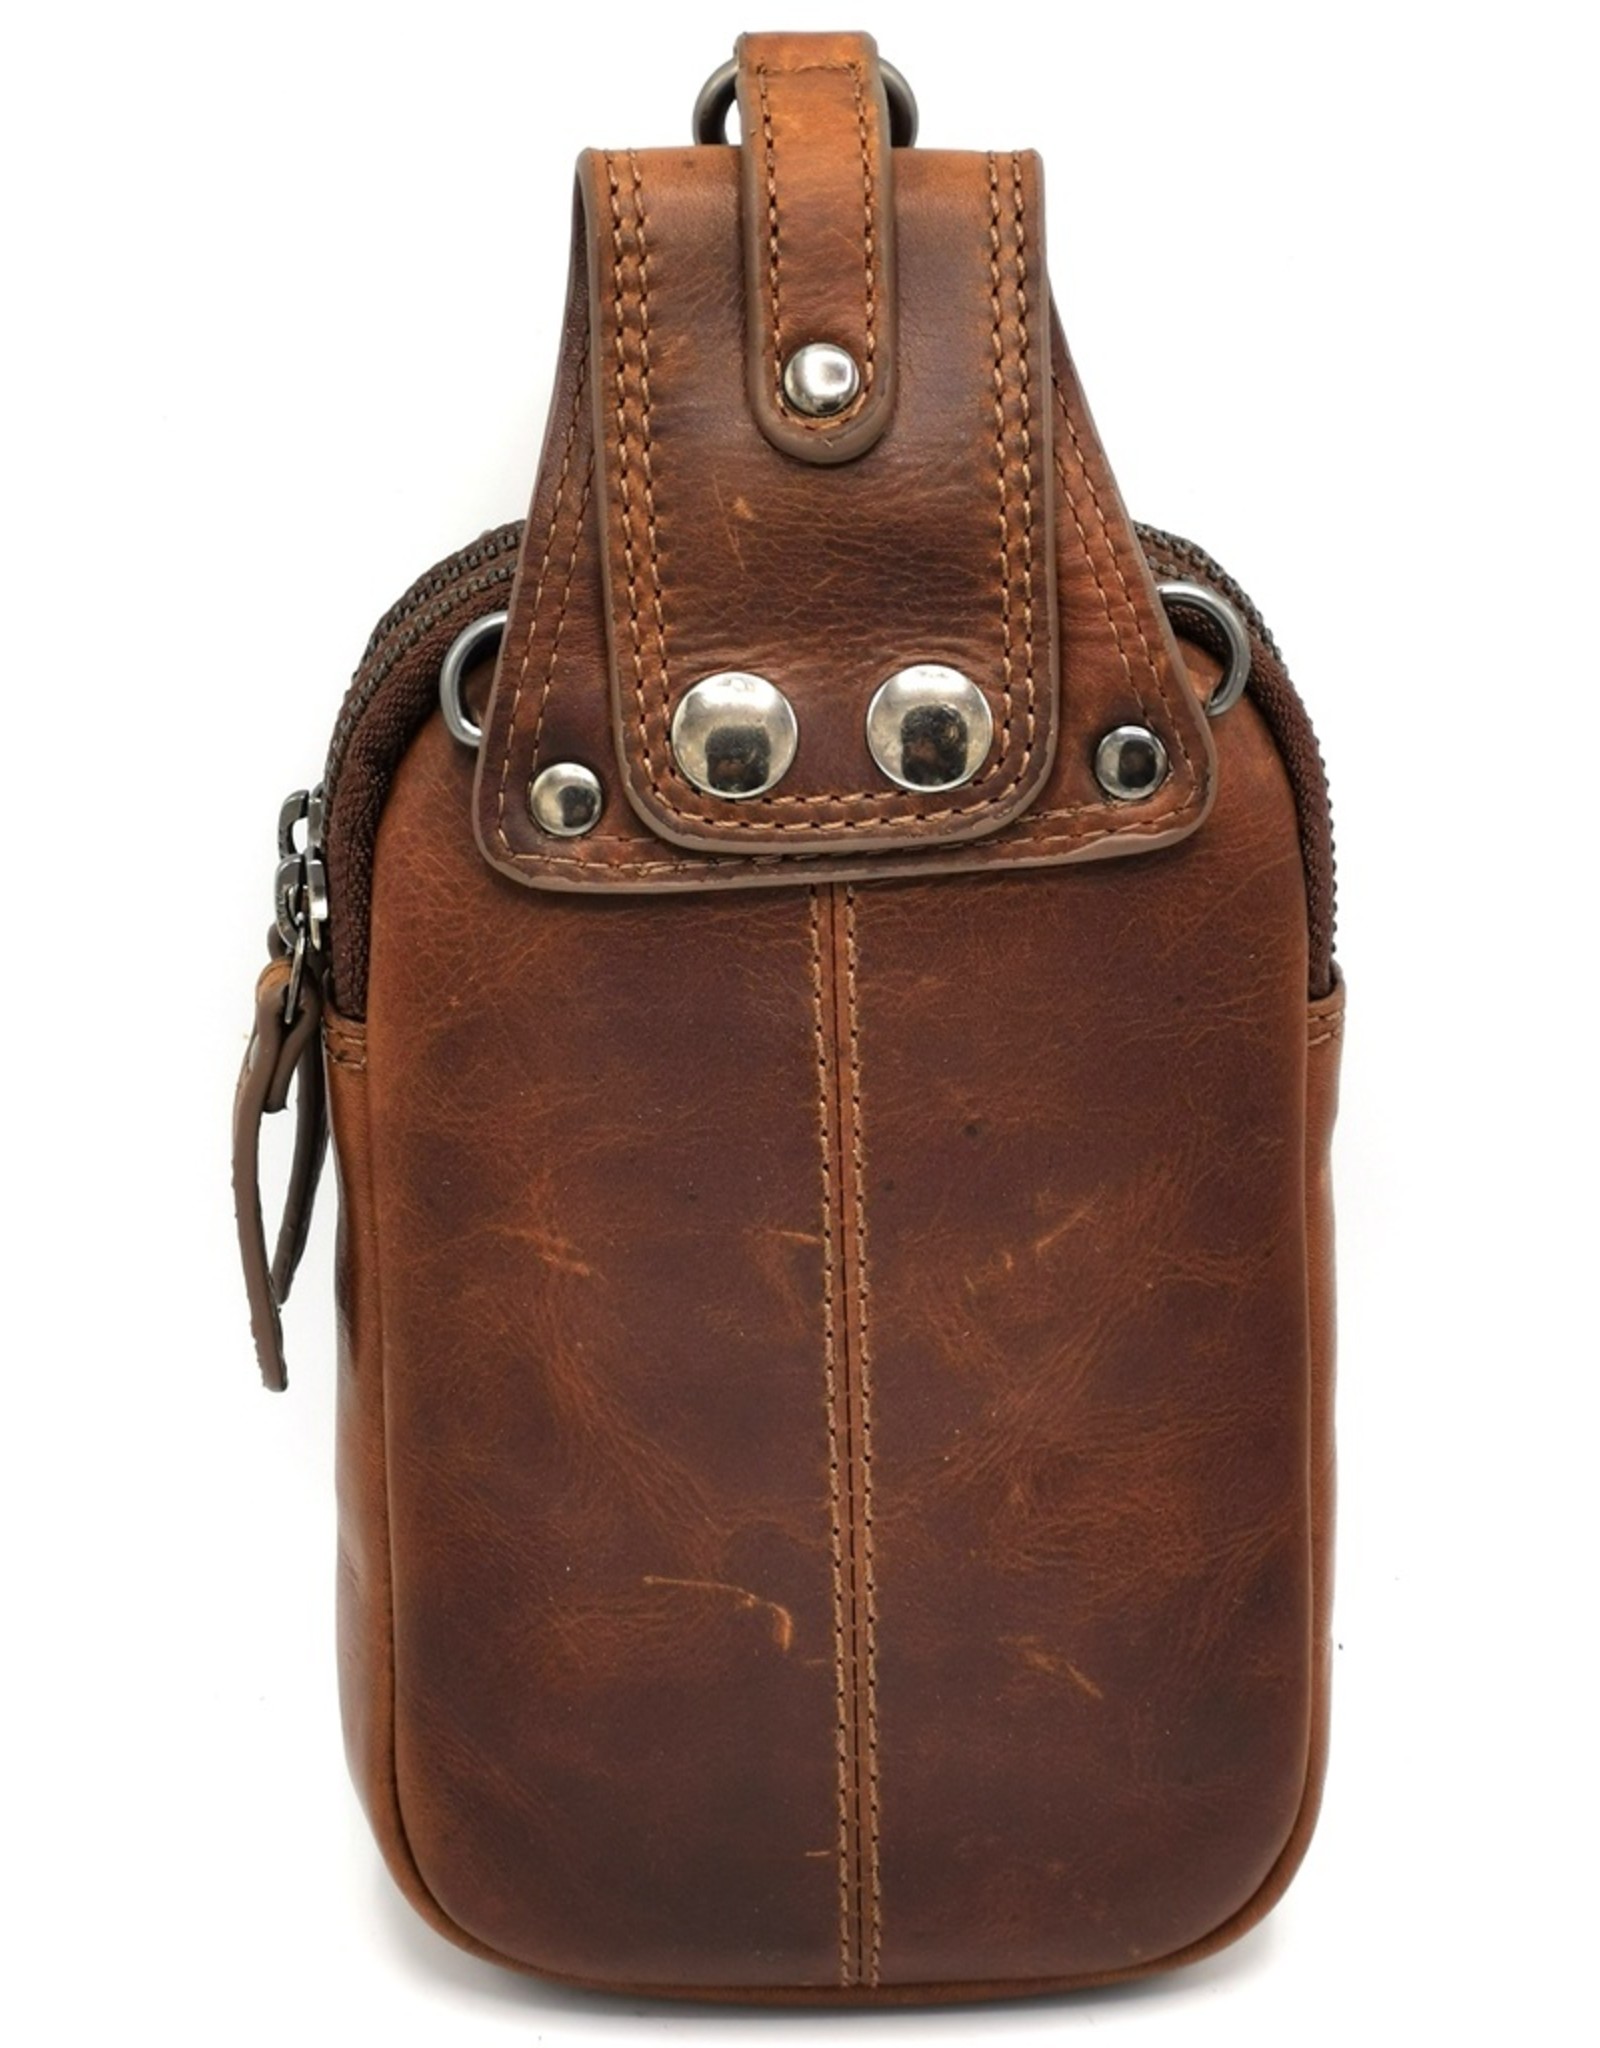 HillBurry Leather bags - HillBurry Leather Belt and Shoulder Bag 2 in 1 Brown